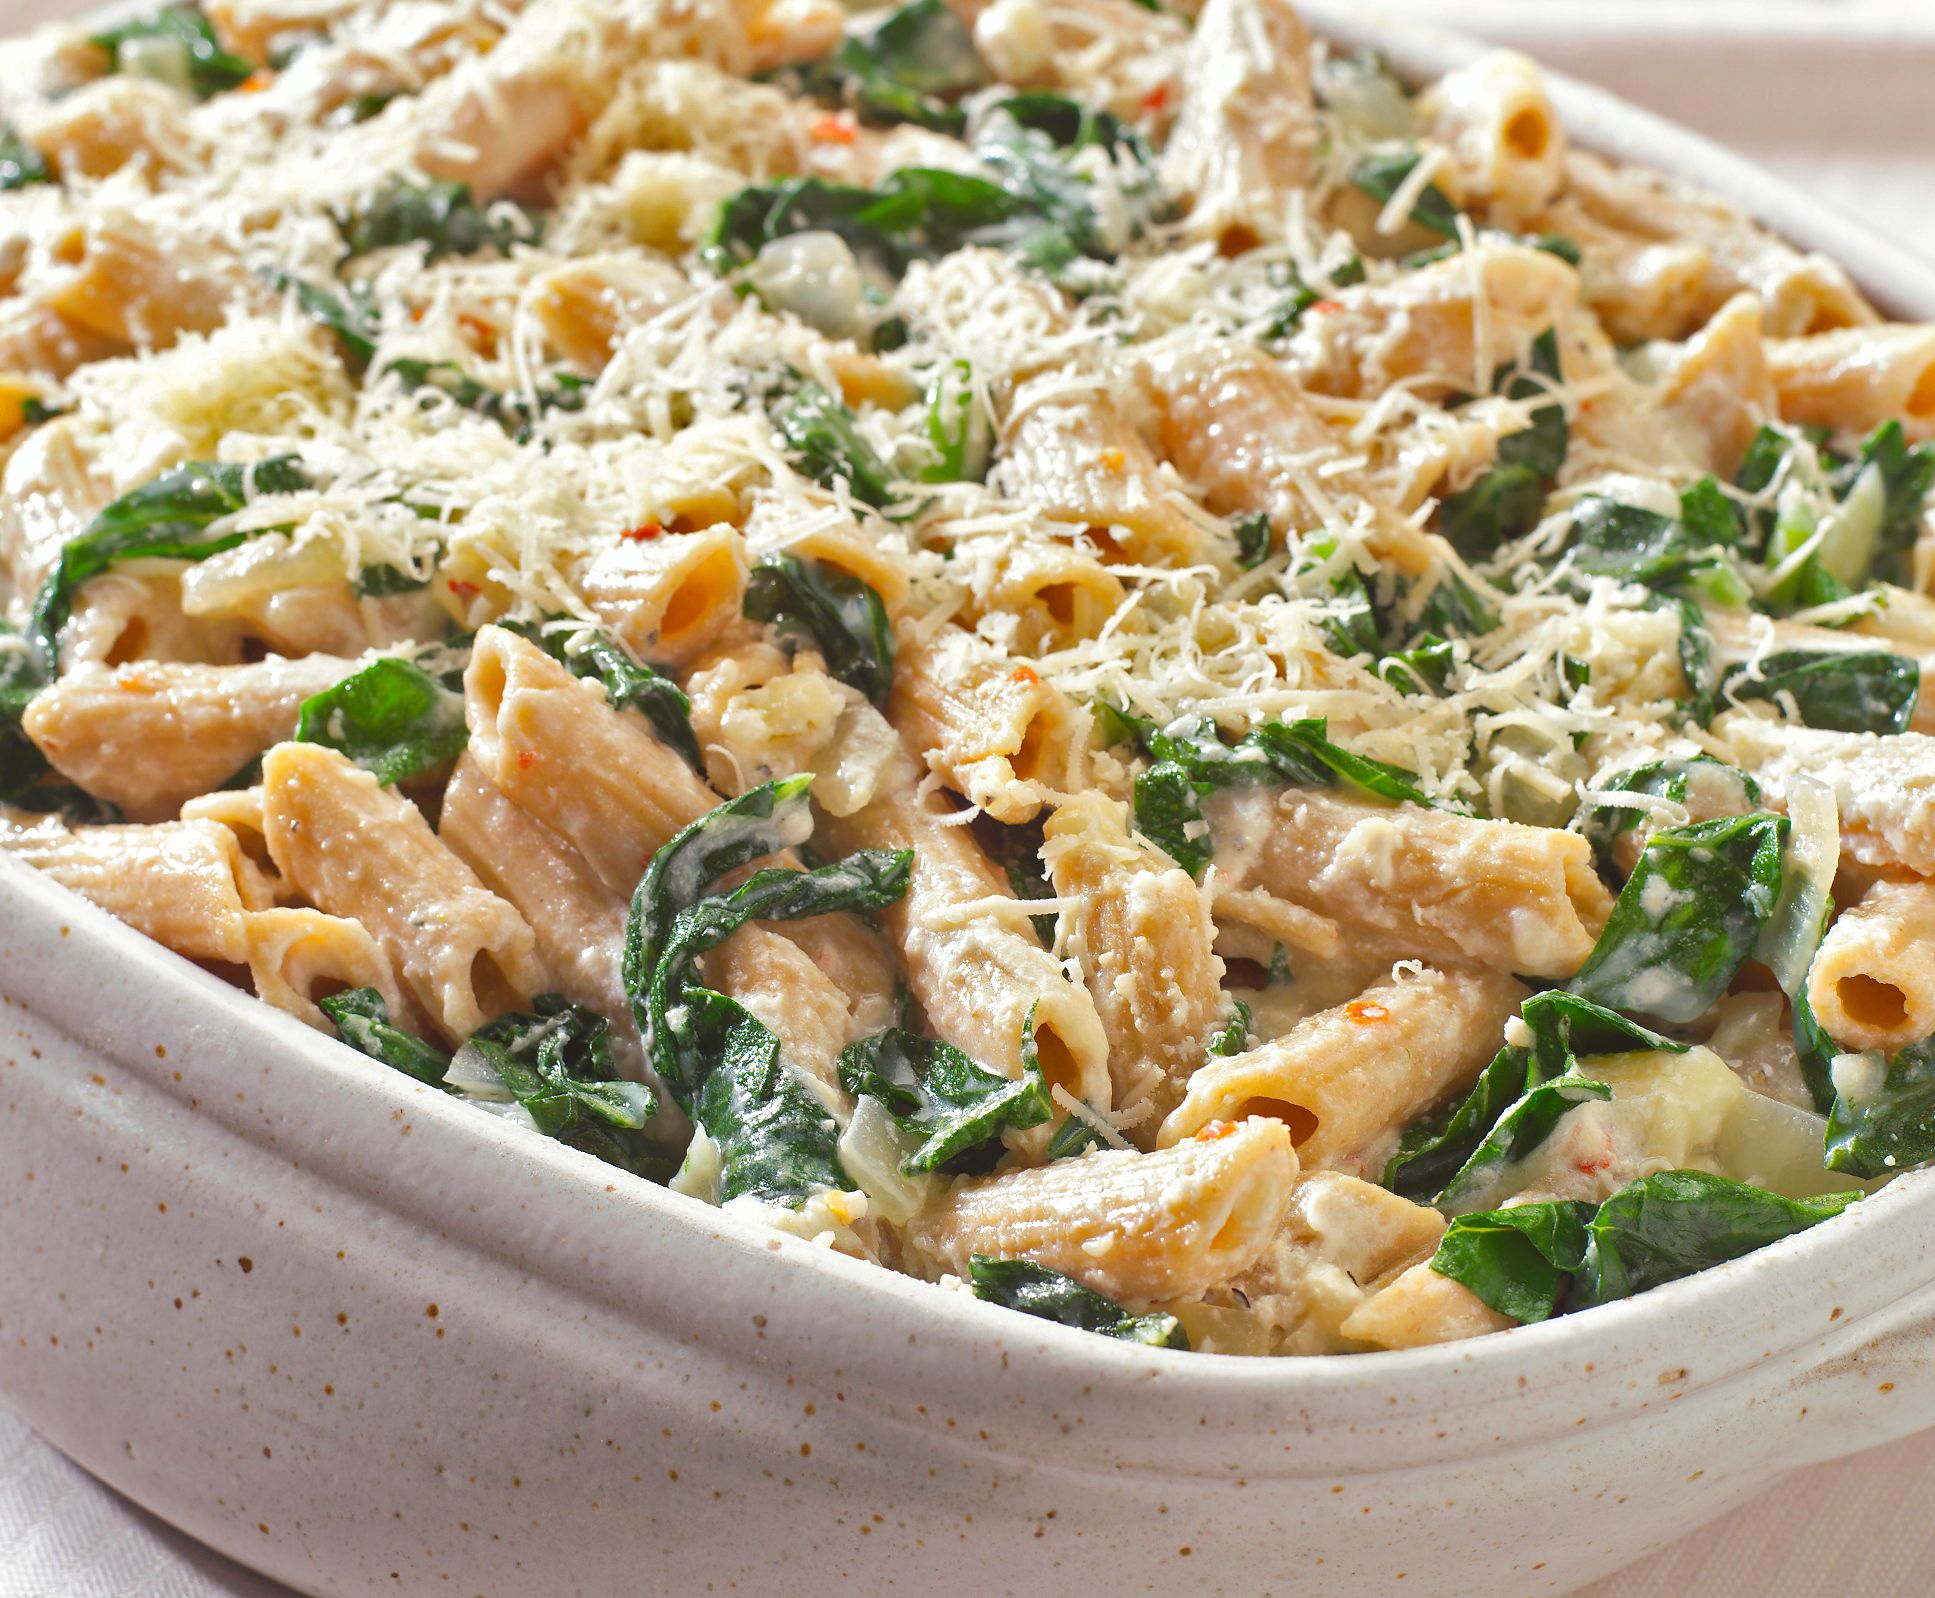 Vegetarian Baked Pasta With Cheese and Spinach Recipe